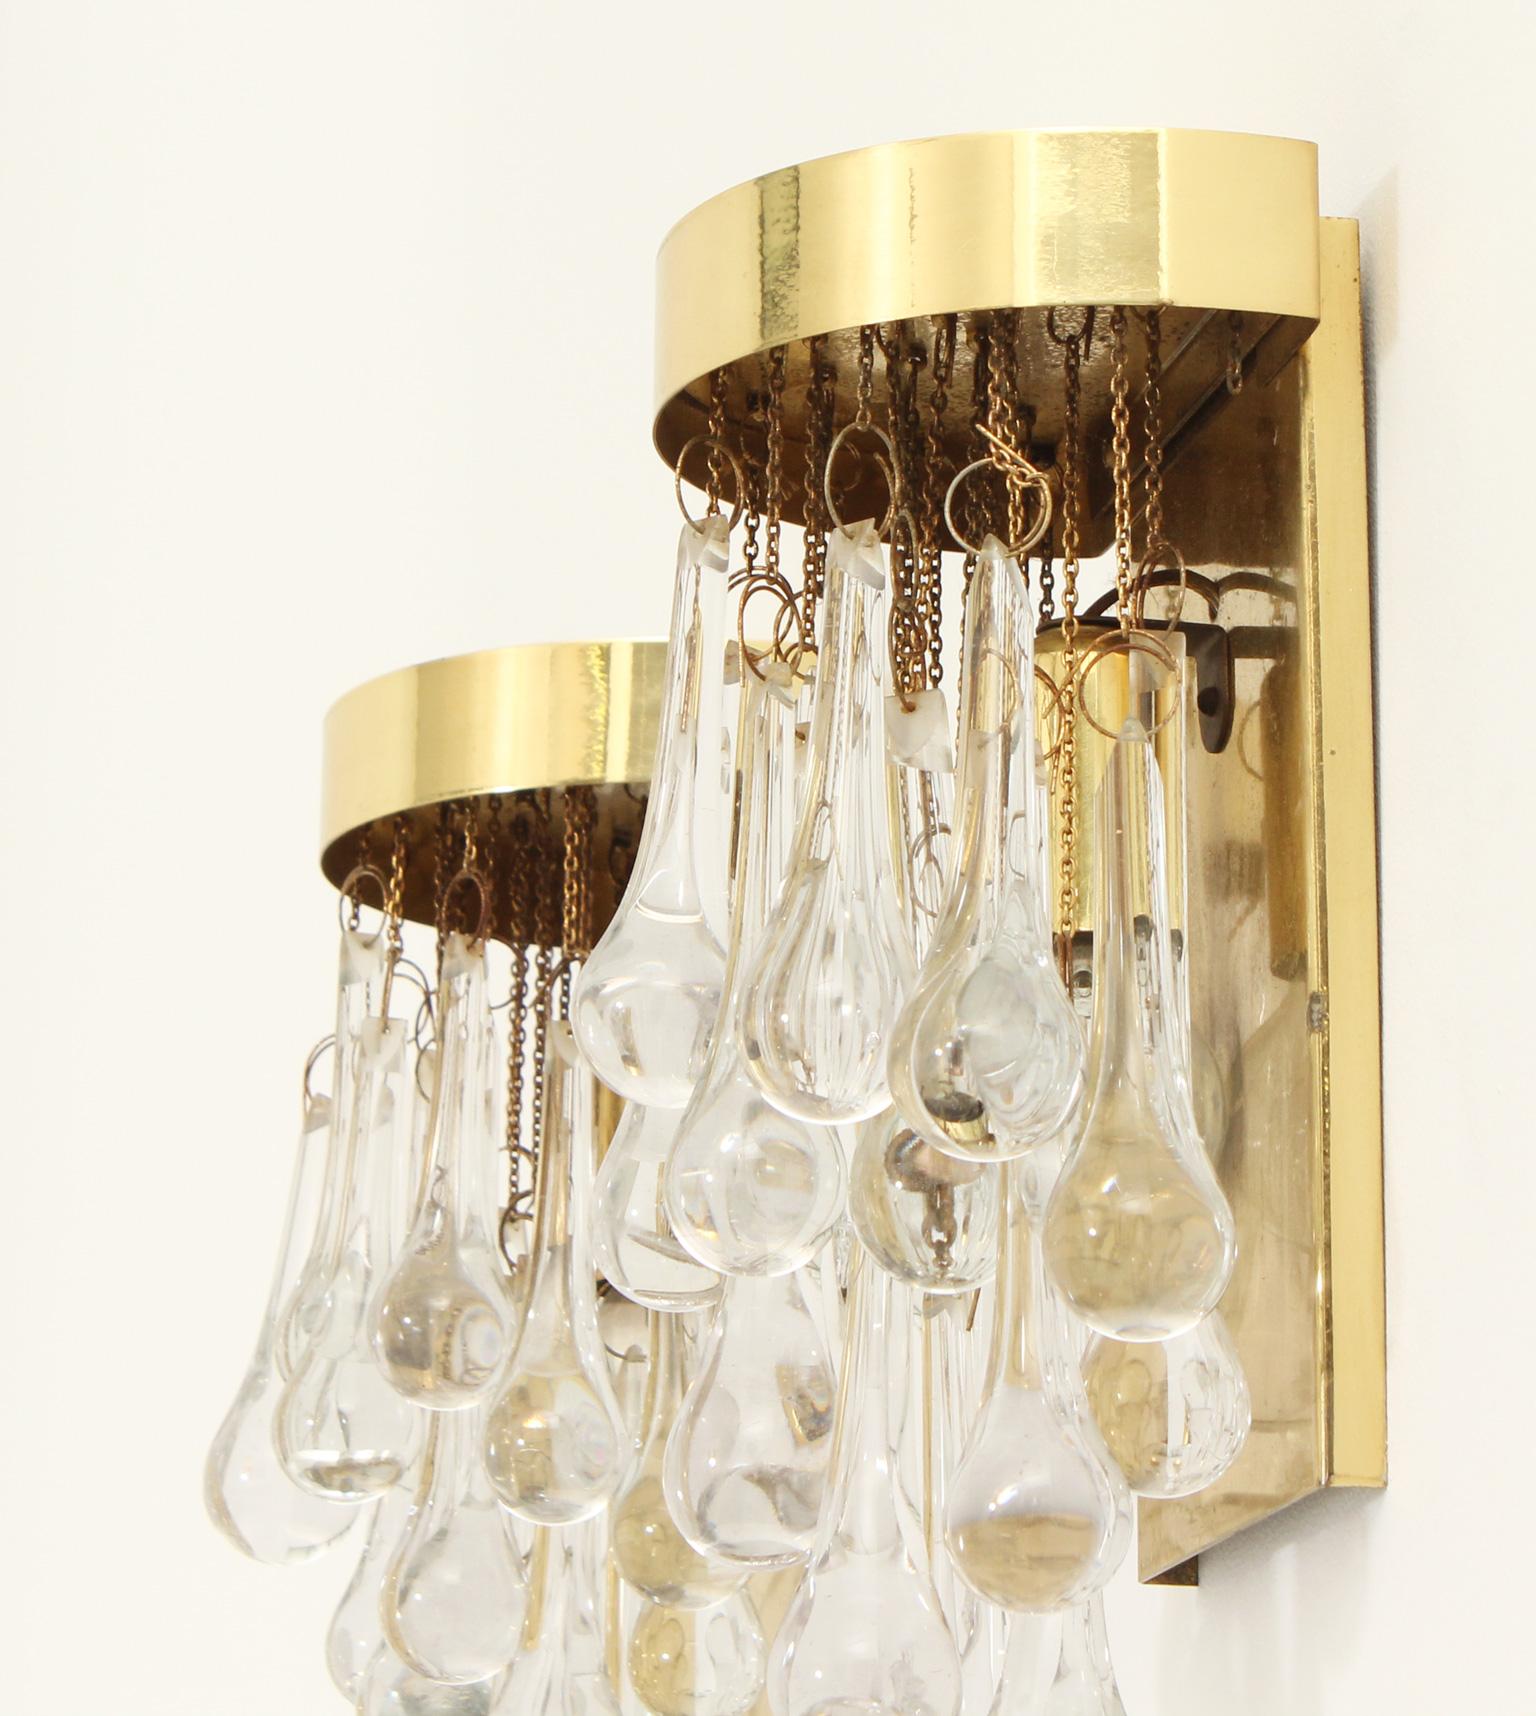 Pair of Brass and Glass Teardrop Sconces by Lumica, Spain, 1970's 1